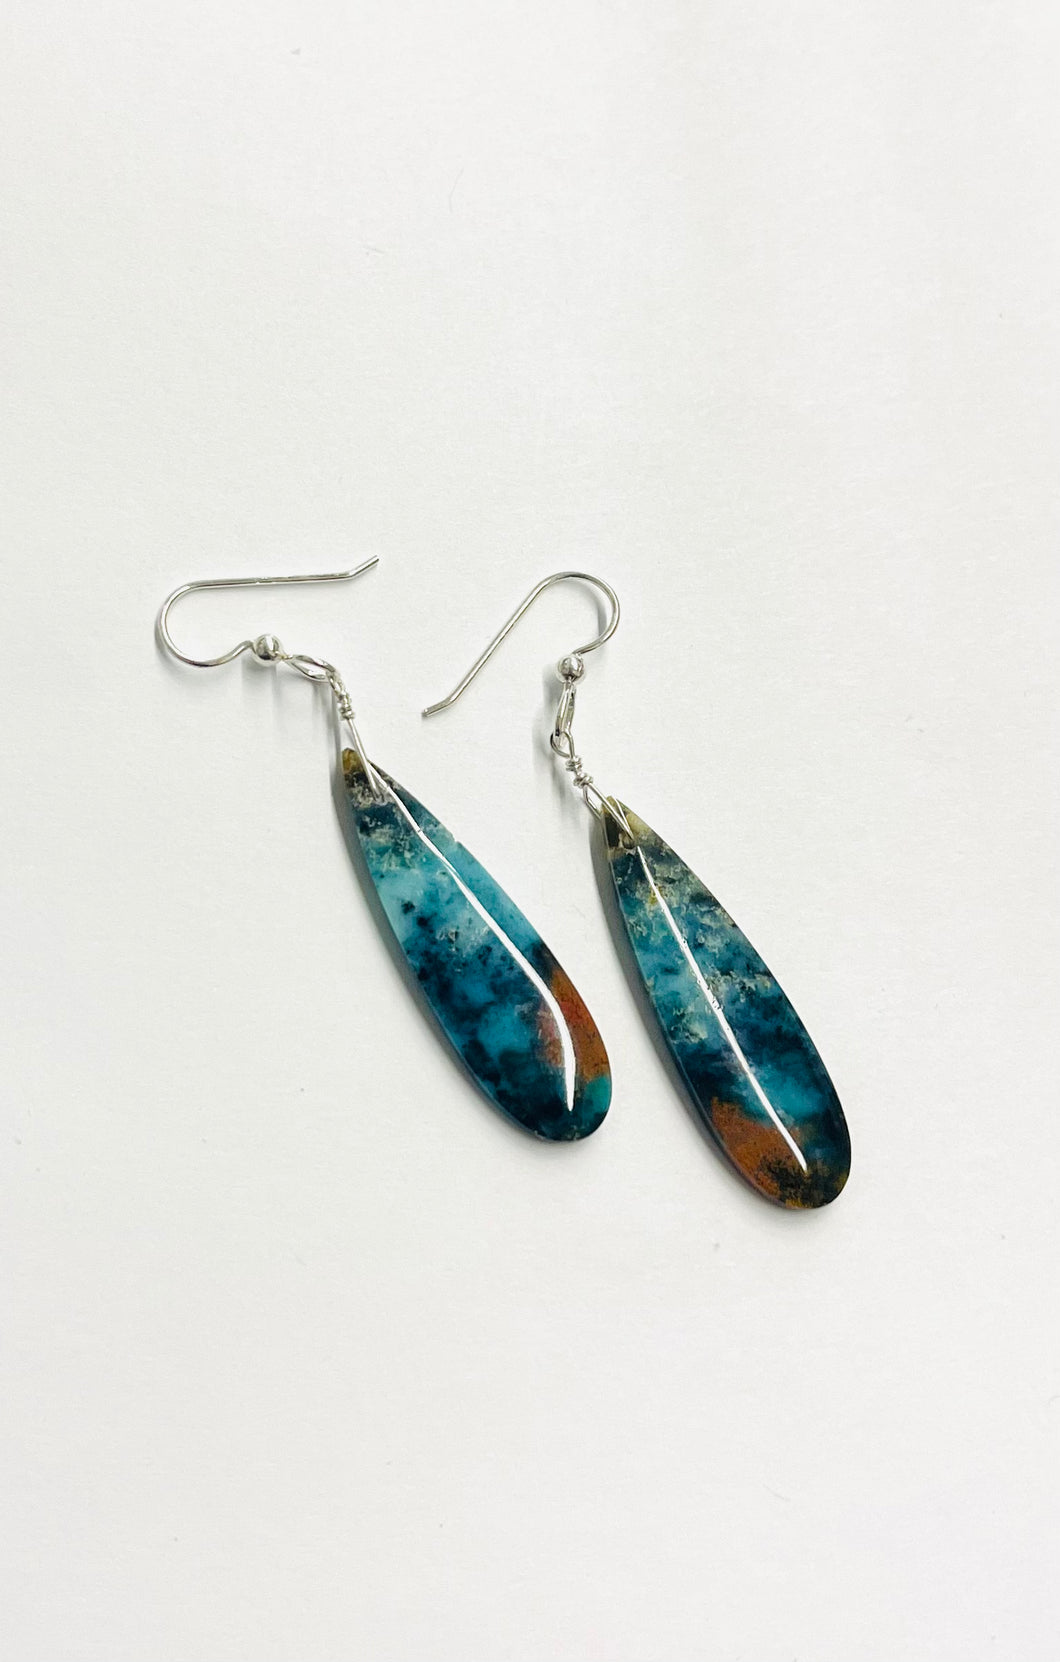 Earrings with dark color opalized wood